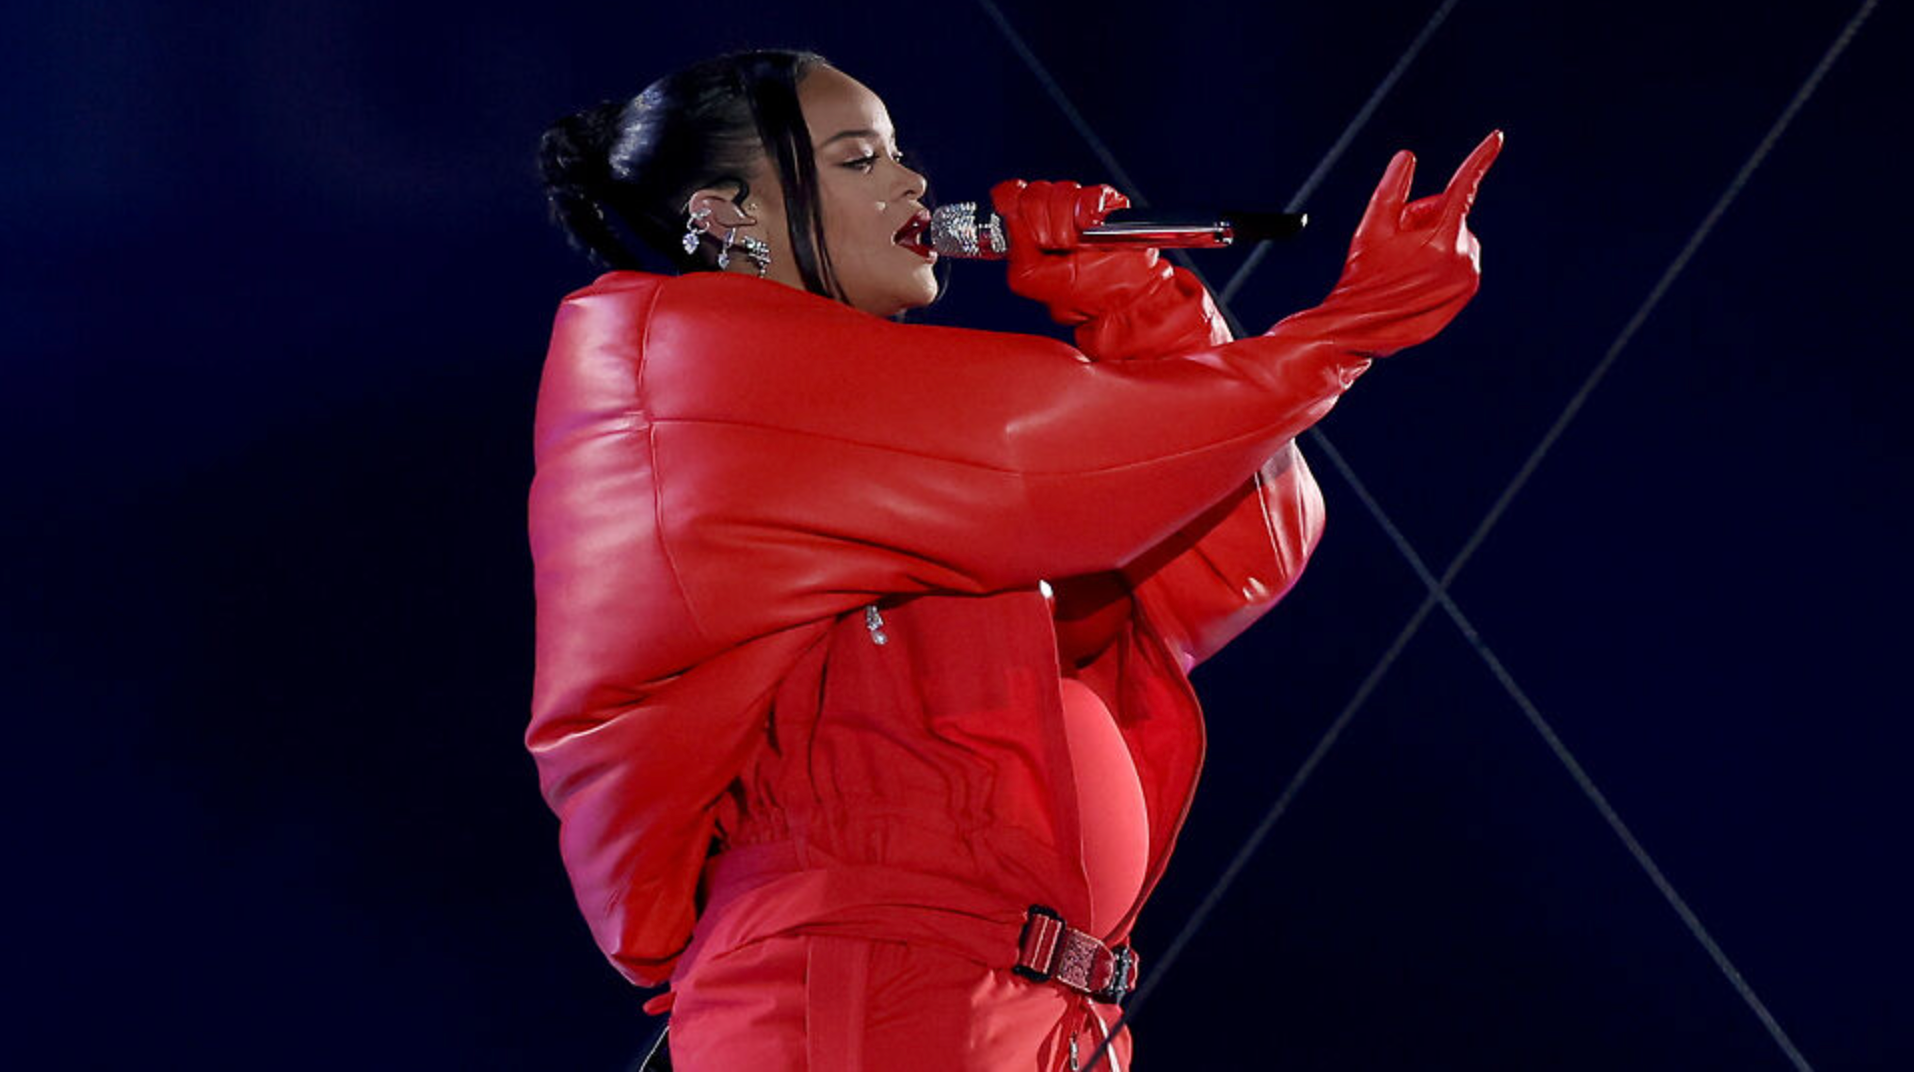 Rihanna reveals her 2nd baby bump at the Super Bowl Half time show